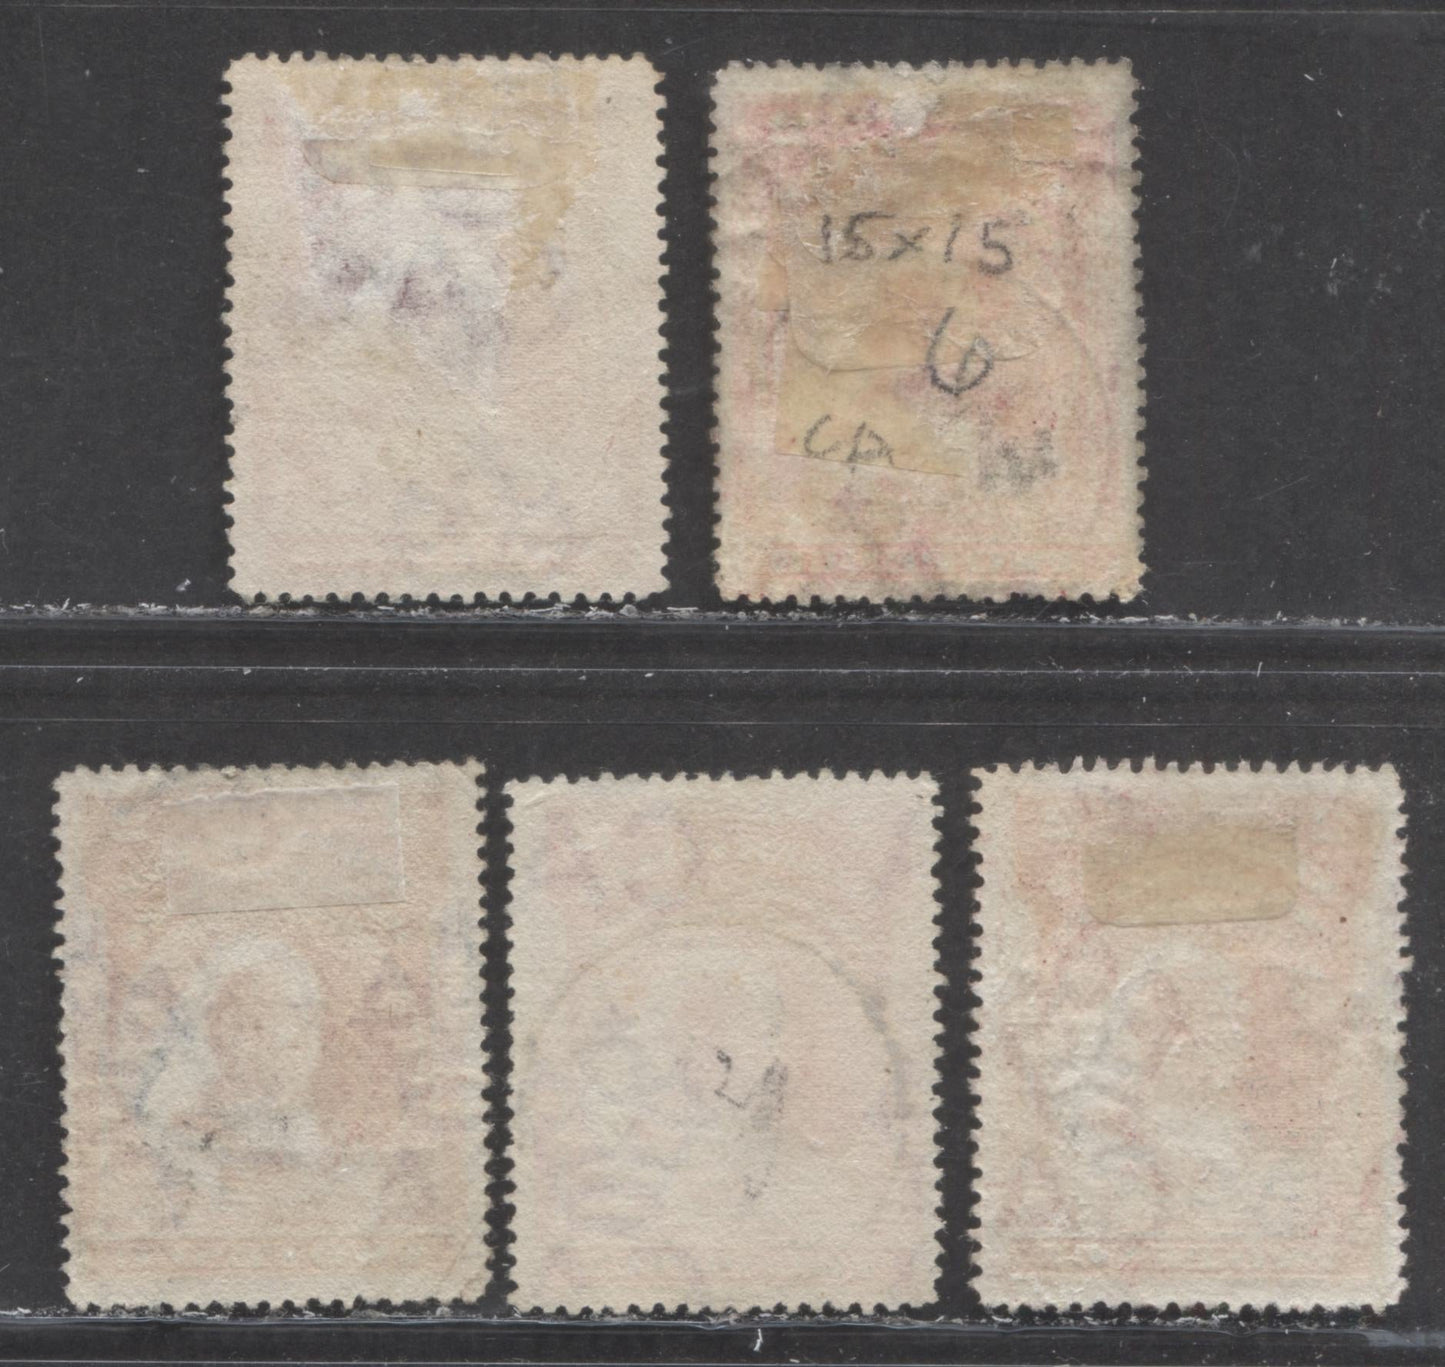 Lot 243 Niger Coast SC#57(SG#68) Two Pence Lake, Carmine Lake, Deep Lake 1897 - 1898 Watermarked Issue, Perf 14.5 - 15, A Fine - Very Fine Used Example, Click on Listing to See ALL Pictures, 2022 Scott Classic Cat. $12.5 USD